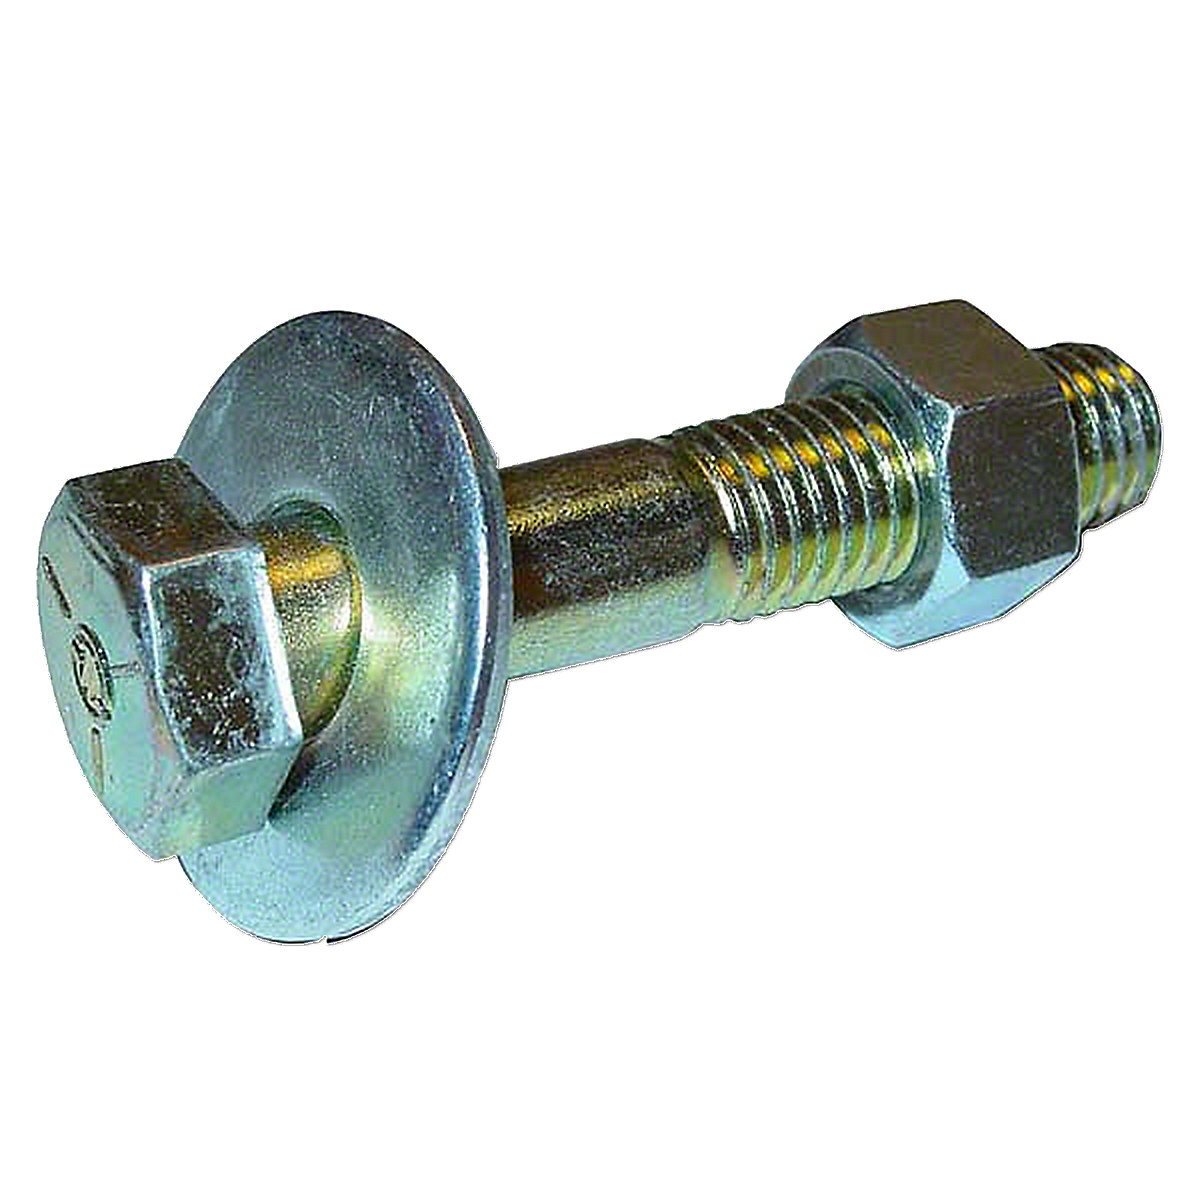 Rear Rim Bolt Assembly With Nut & Washer For Massey Harris And Massey Ferguson Tractors.